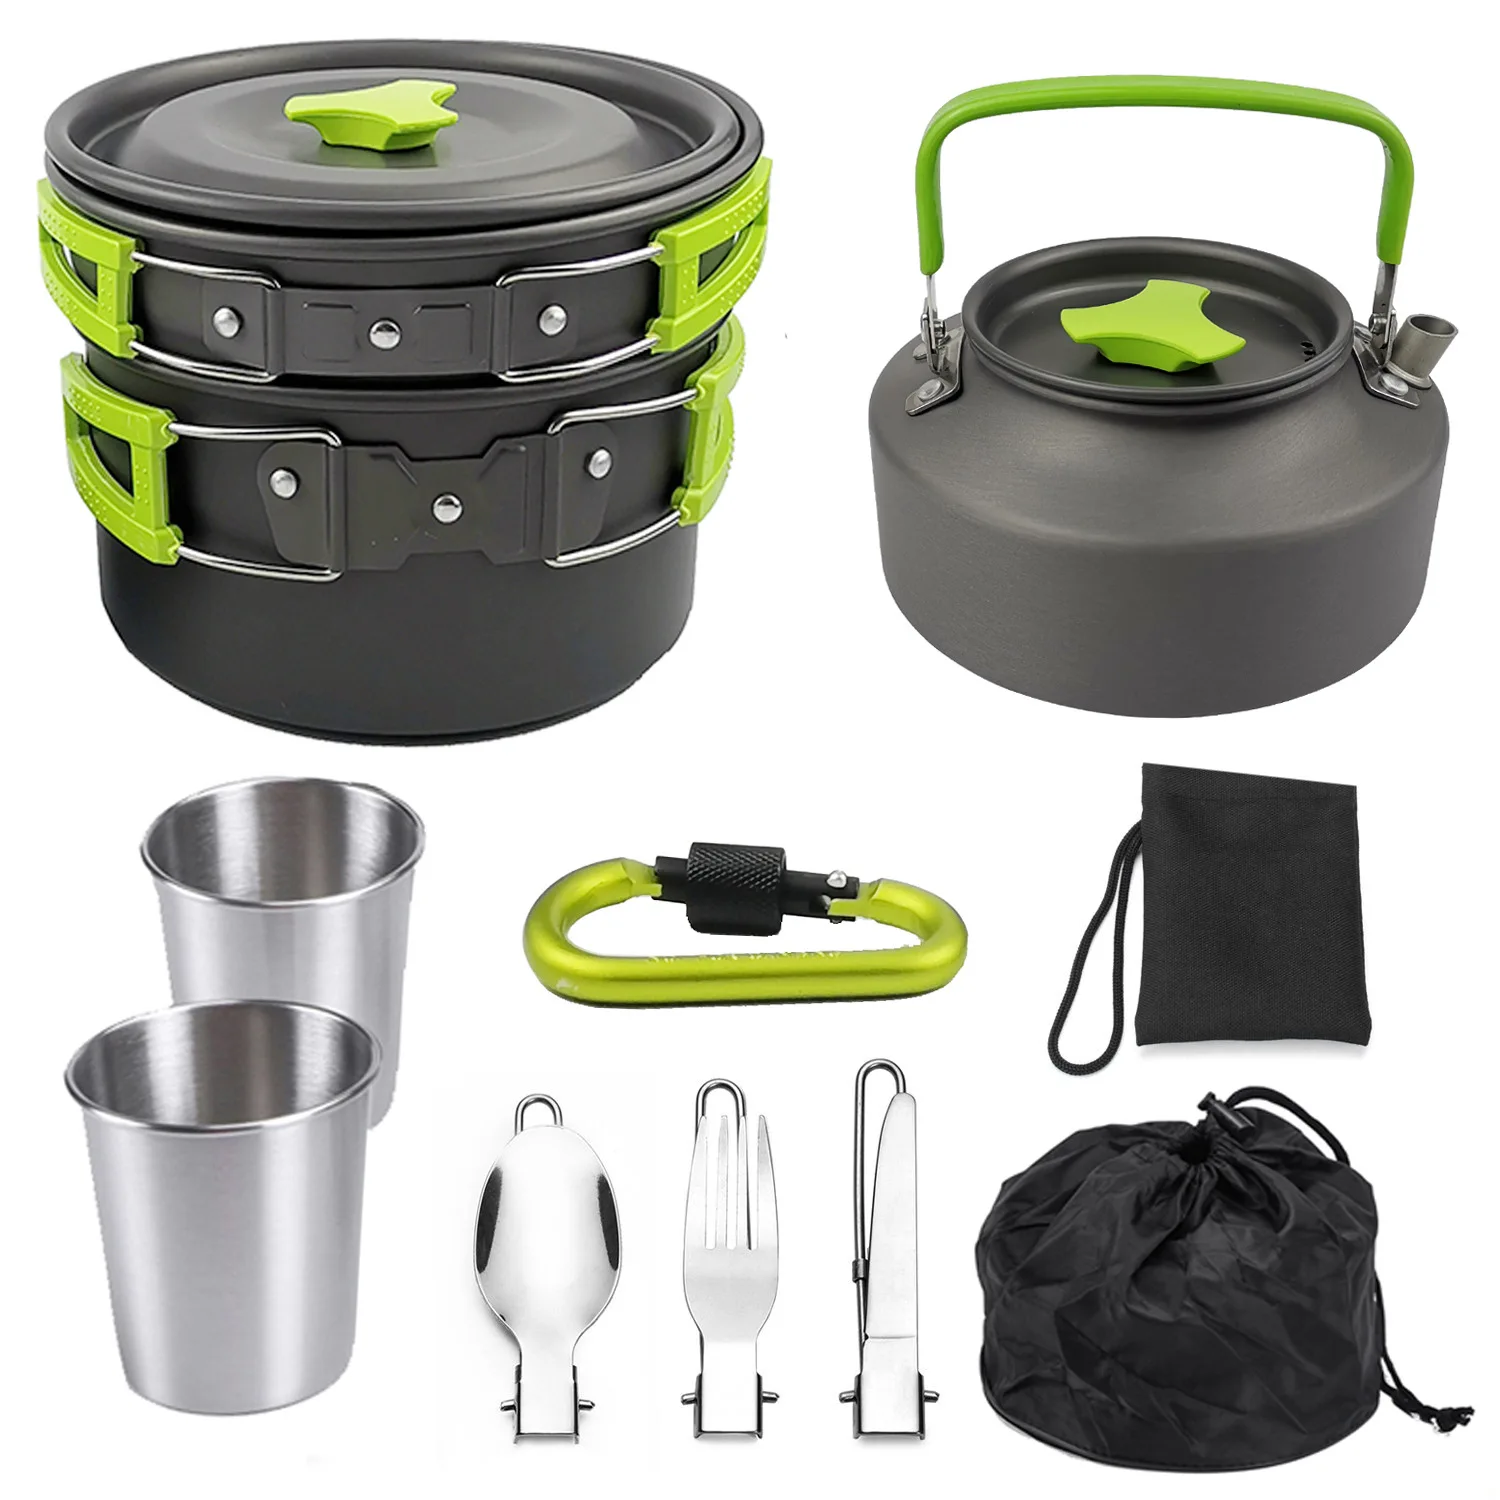 

high quality aluminium camping pot kitchen set hiking backpacking cookware outdoor camping cooking cookware set